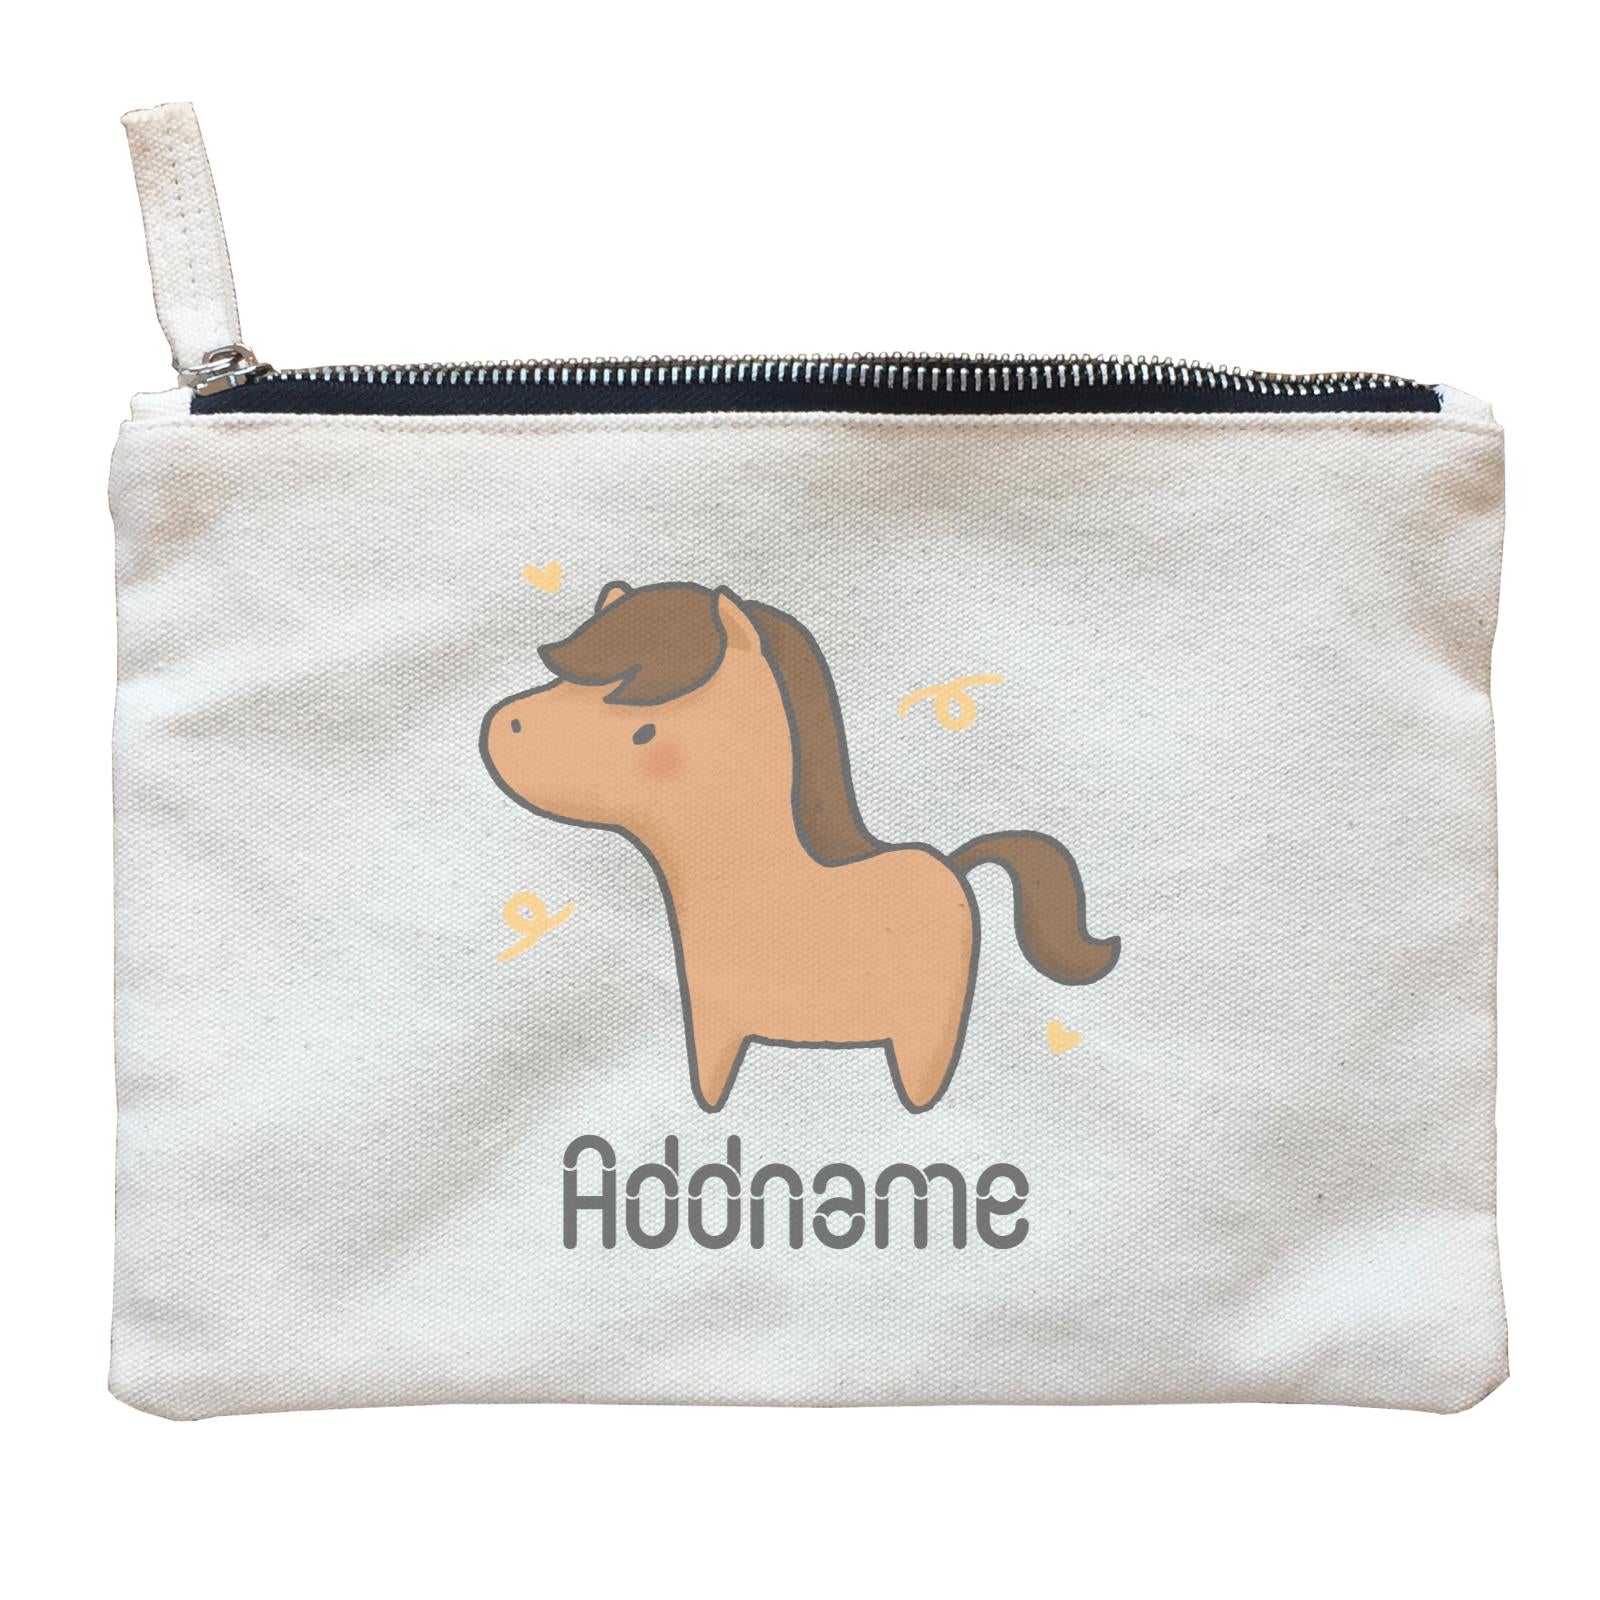 Cute Hand Drawn Style Horse Addname Zipper Pouch